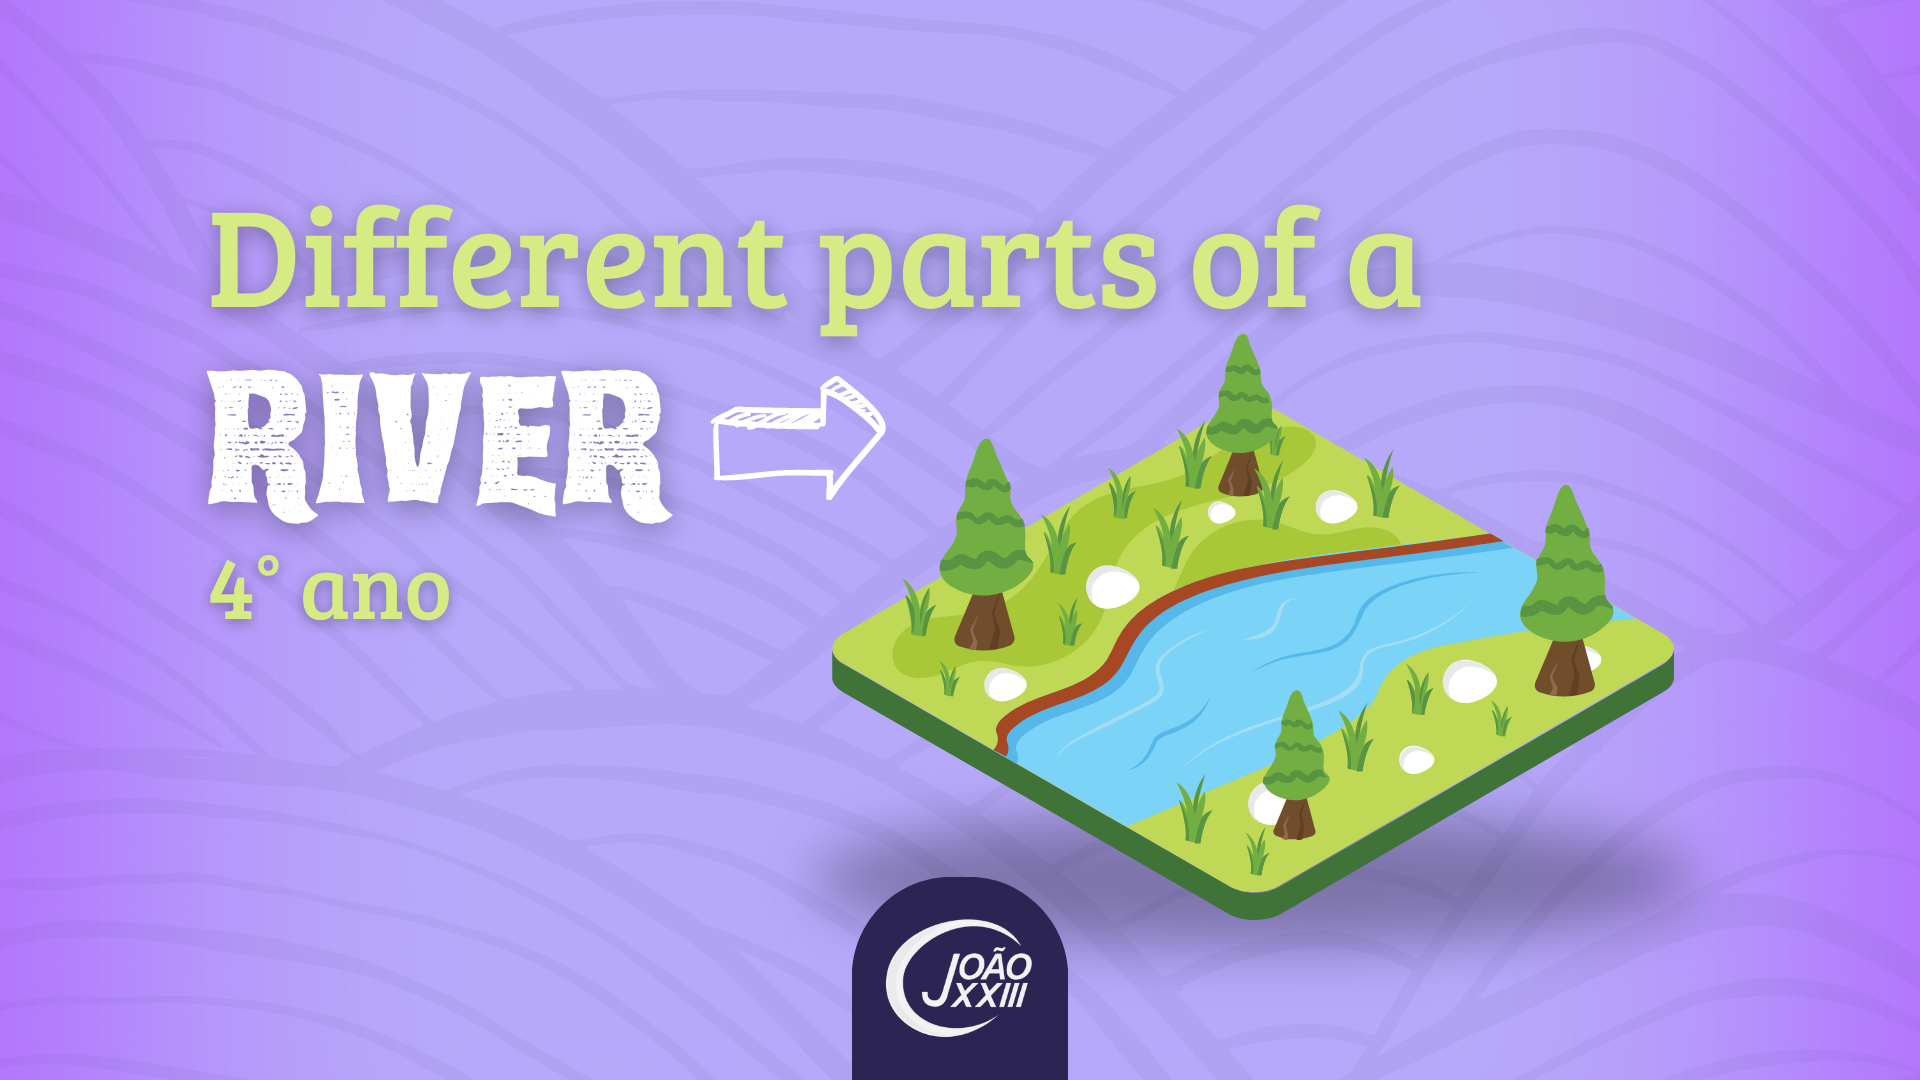 You are currently viewing Different parts of a river